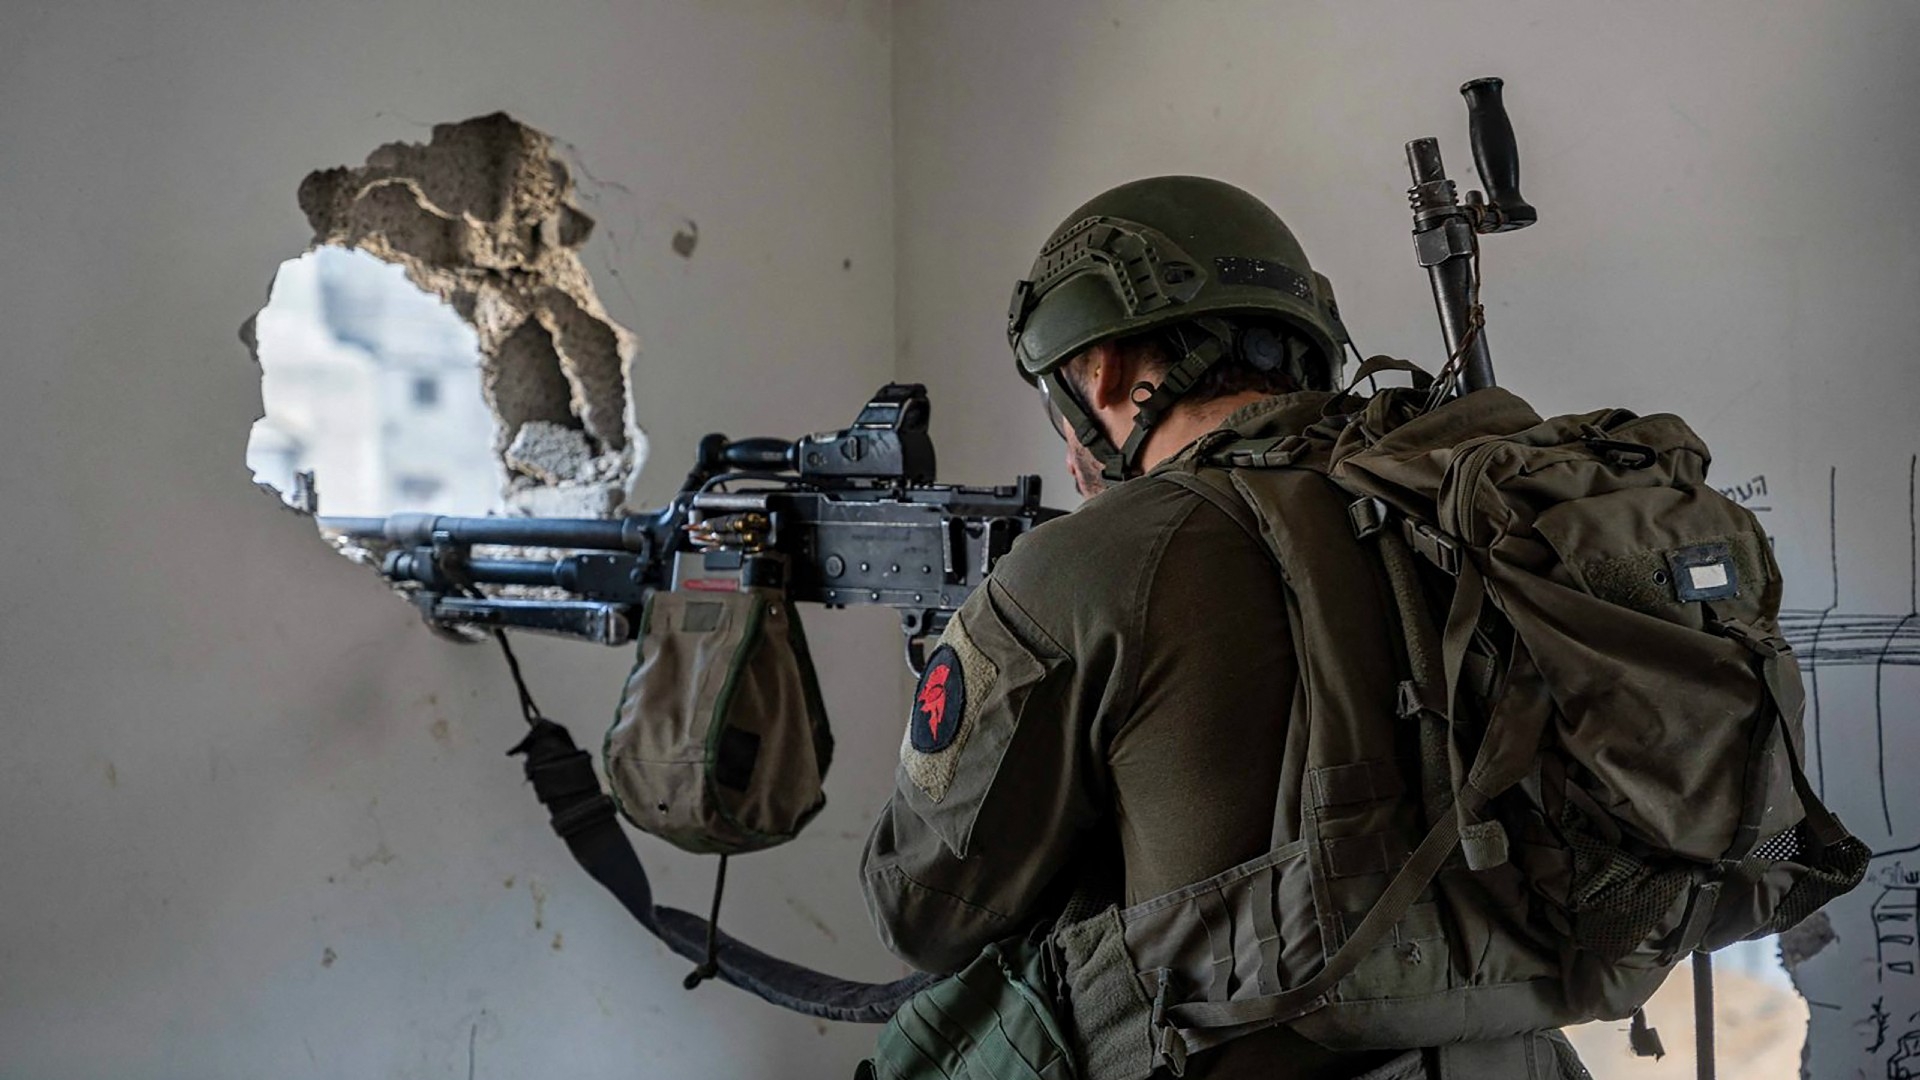 An Israeli soldier aiming his weapon in the Gaza Strip (AFP)